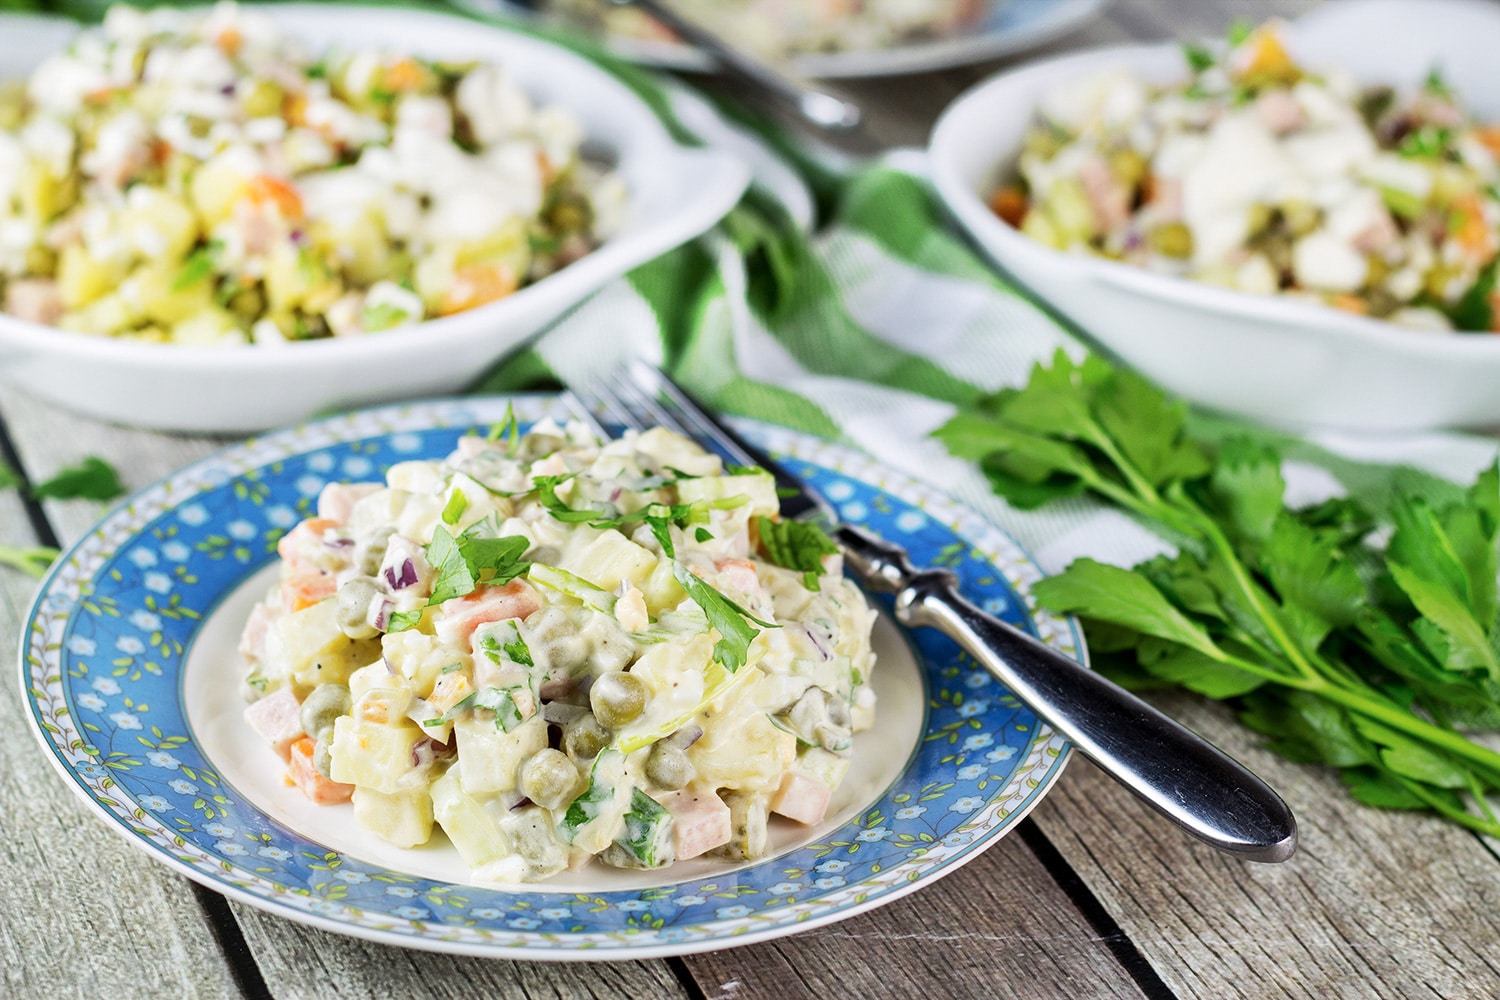 Olivier Salad, also known as Russian Potato Salad, is one of the most famous Russian foods. It is hearty, comforting, filling, and super delicious! | cookingtheglobe.com